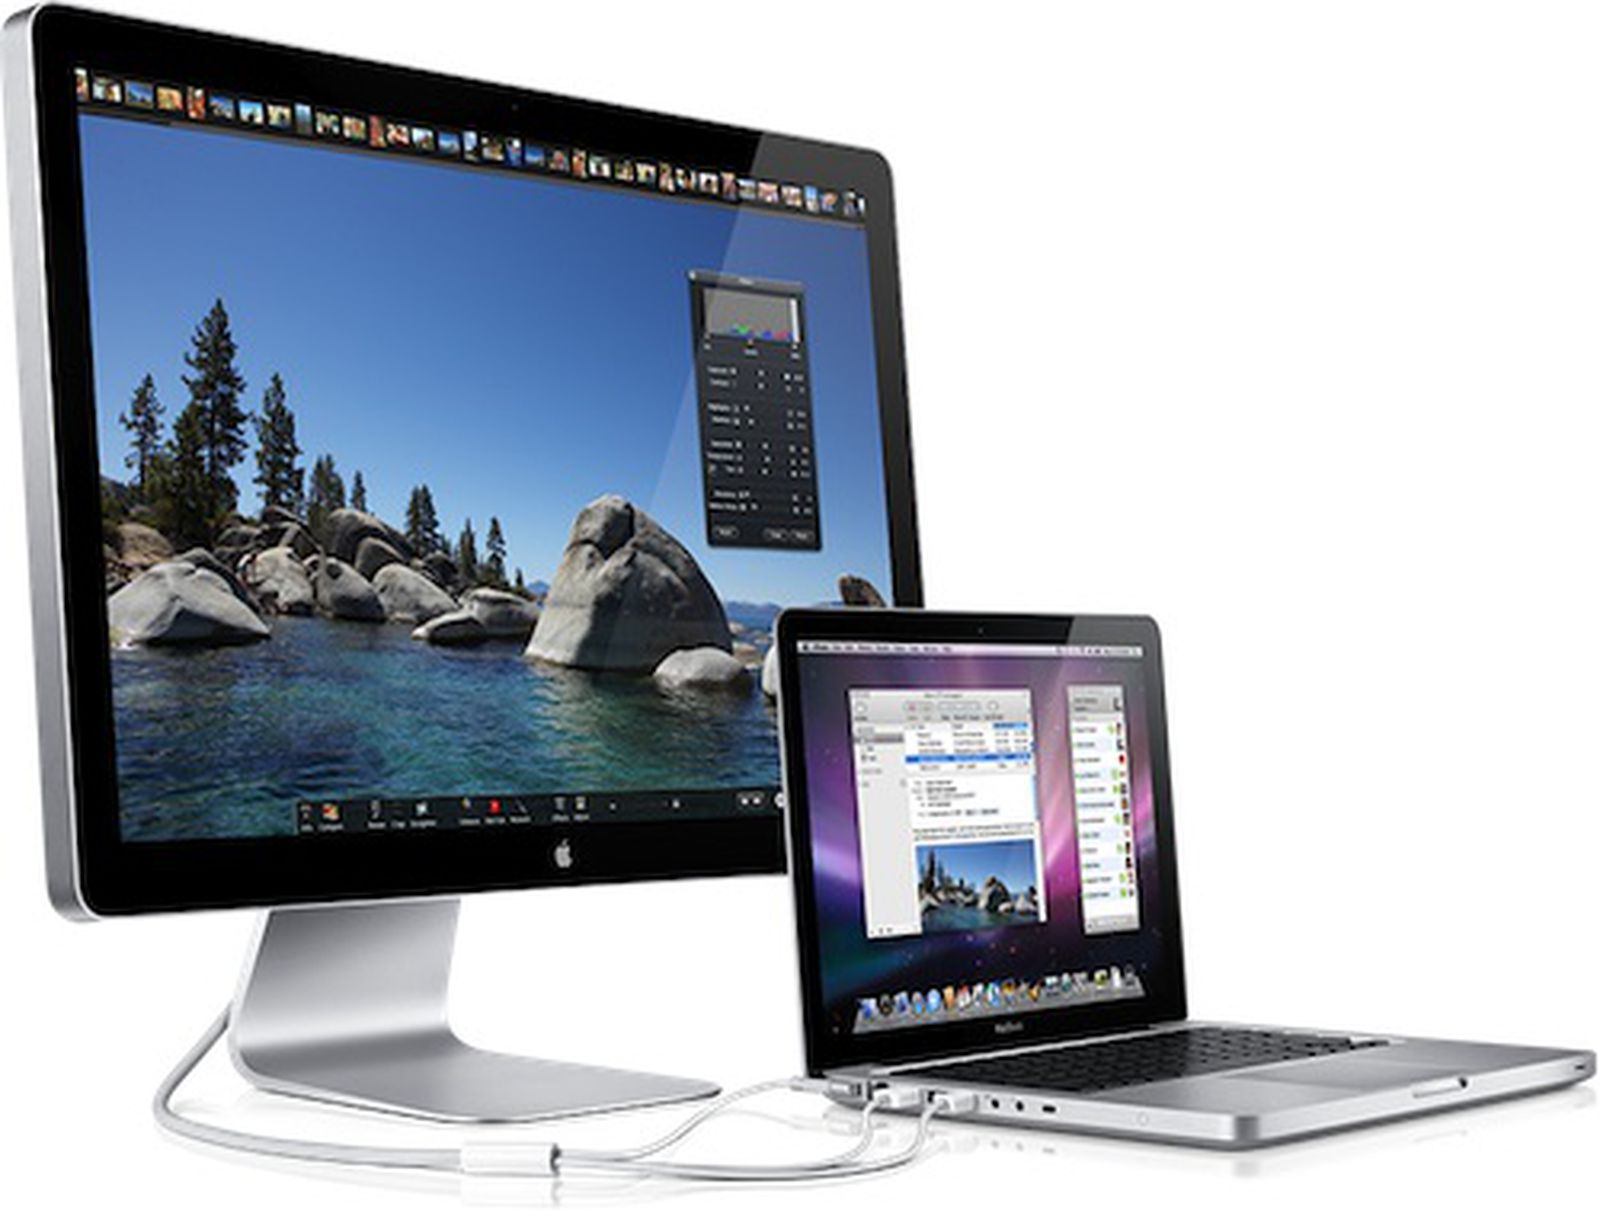 Apple Quietly Releases Fix For Flickering On 24 Inch Led Cinema Display Over Thunderbolt Update Pulled Macrumors